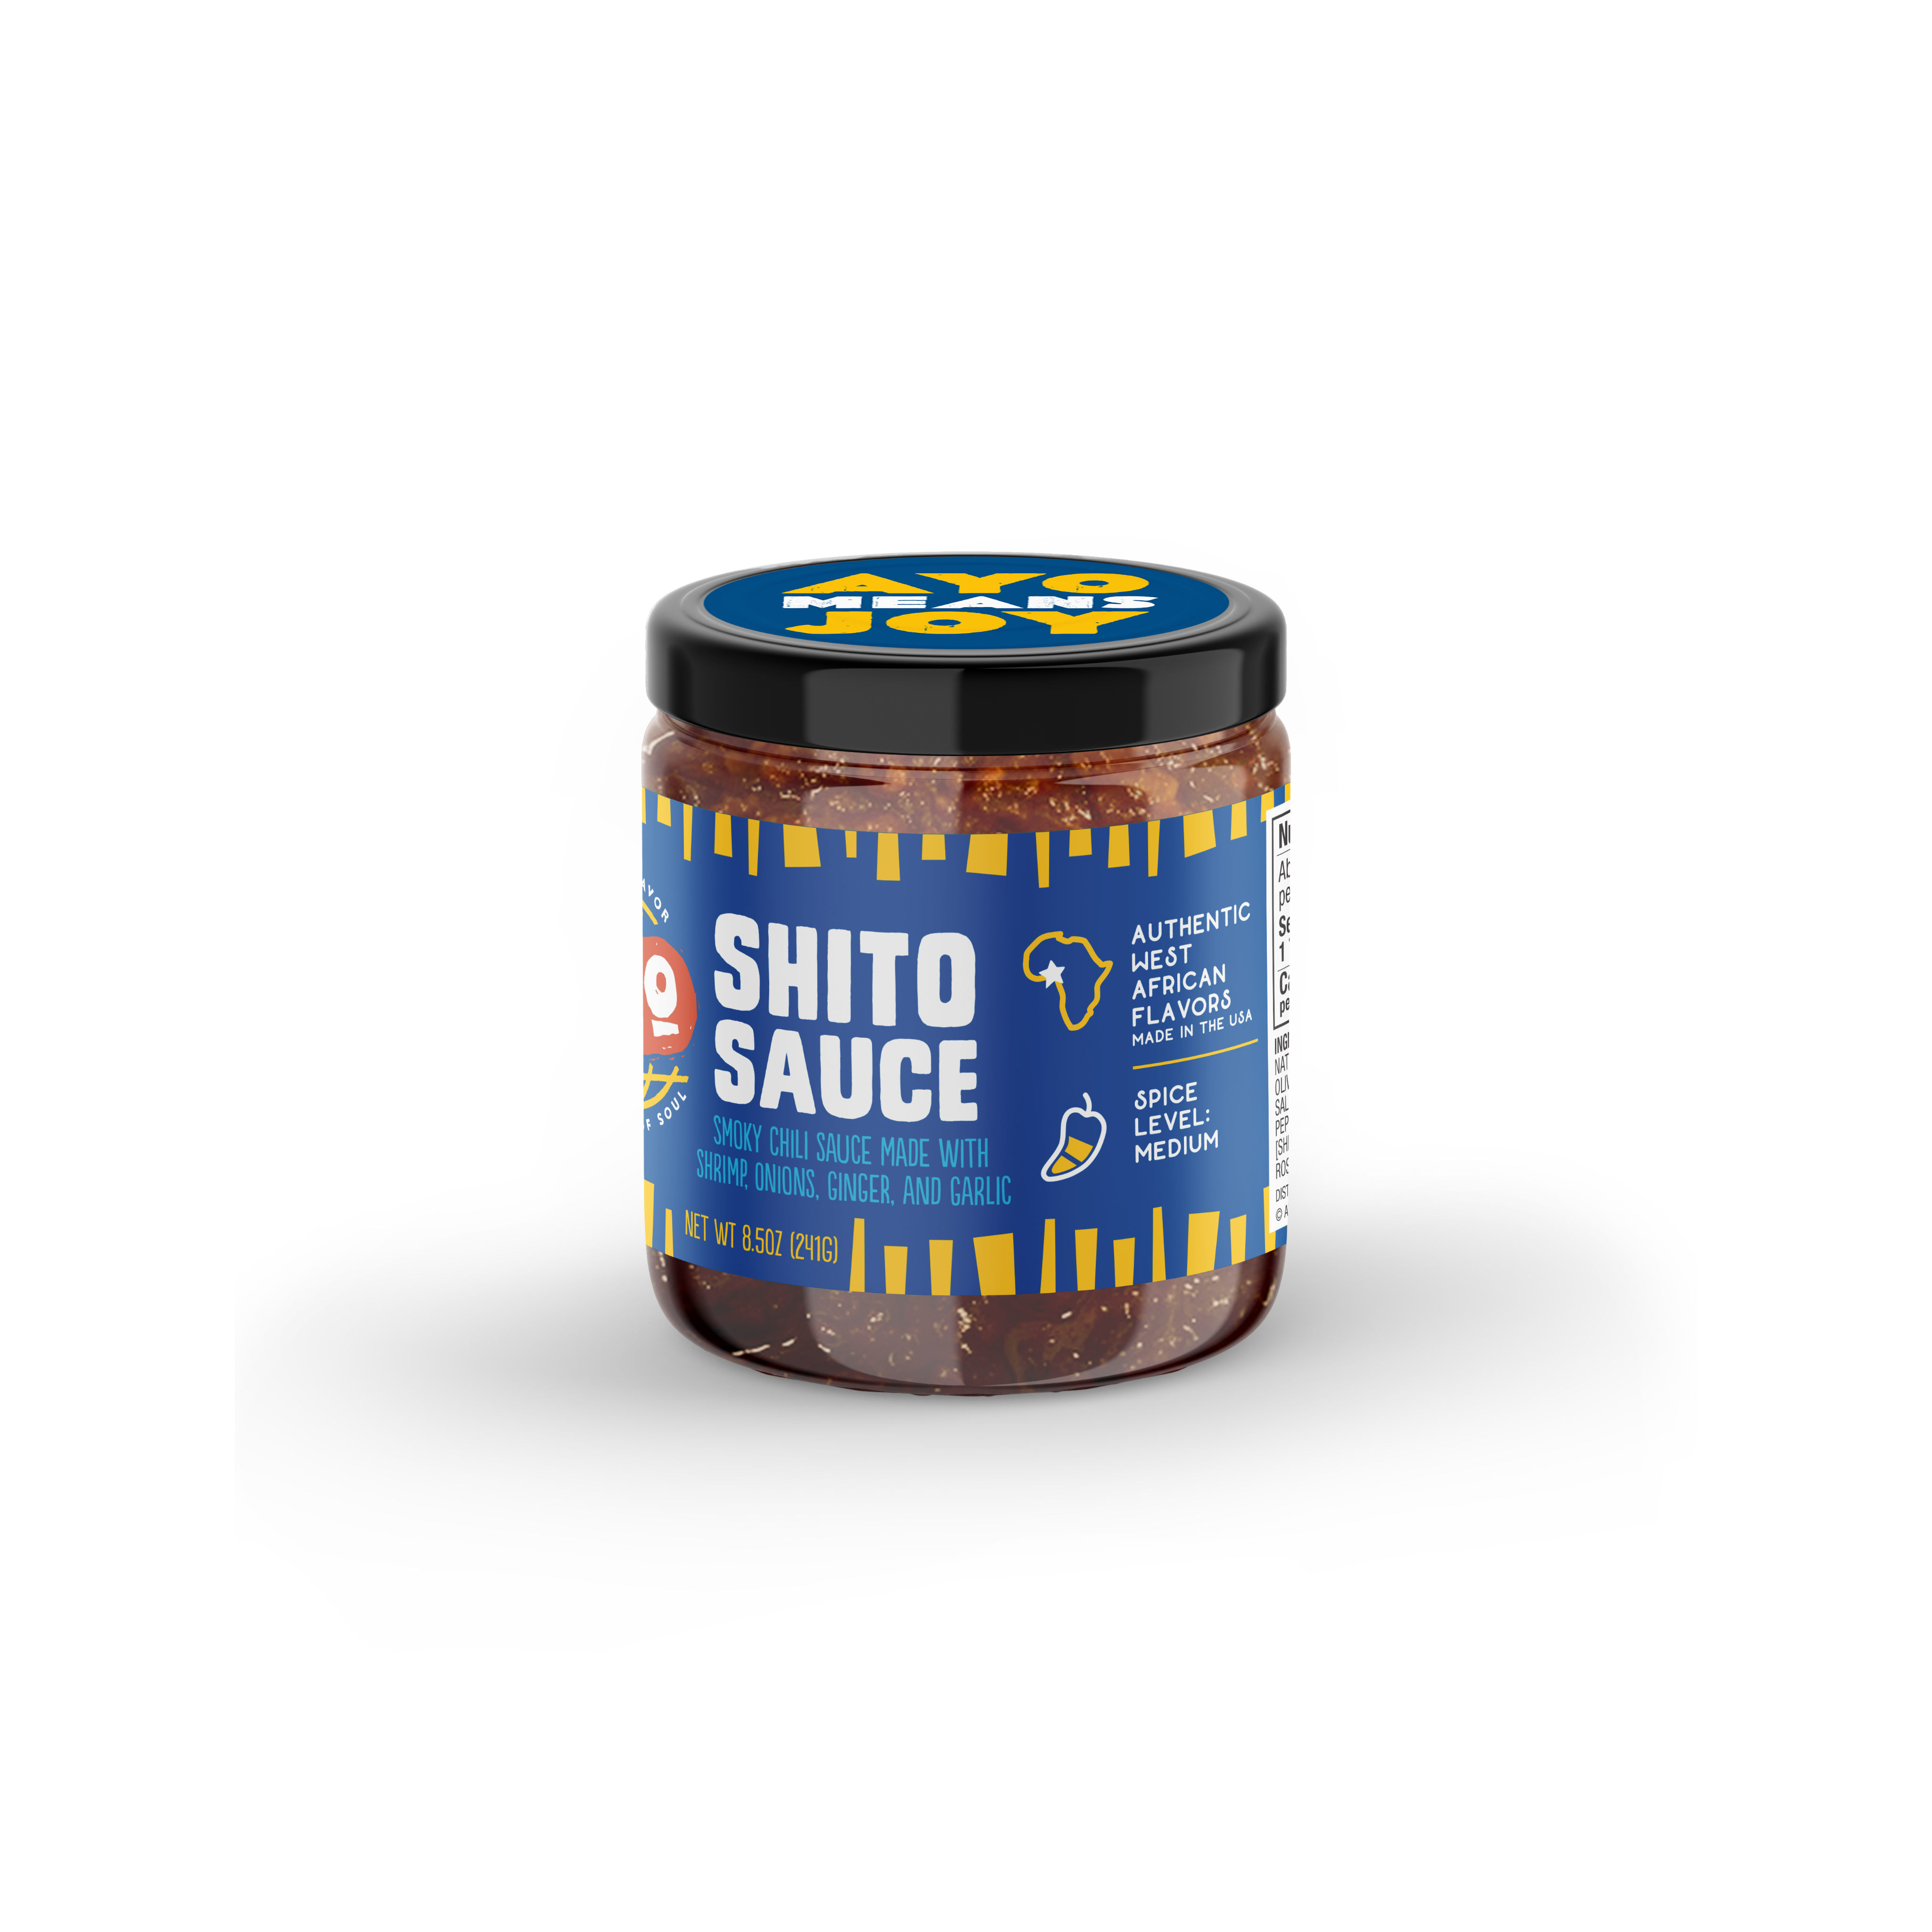 This is How to Make Ghanaian Hot Chilli Sauce 'Shito